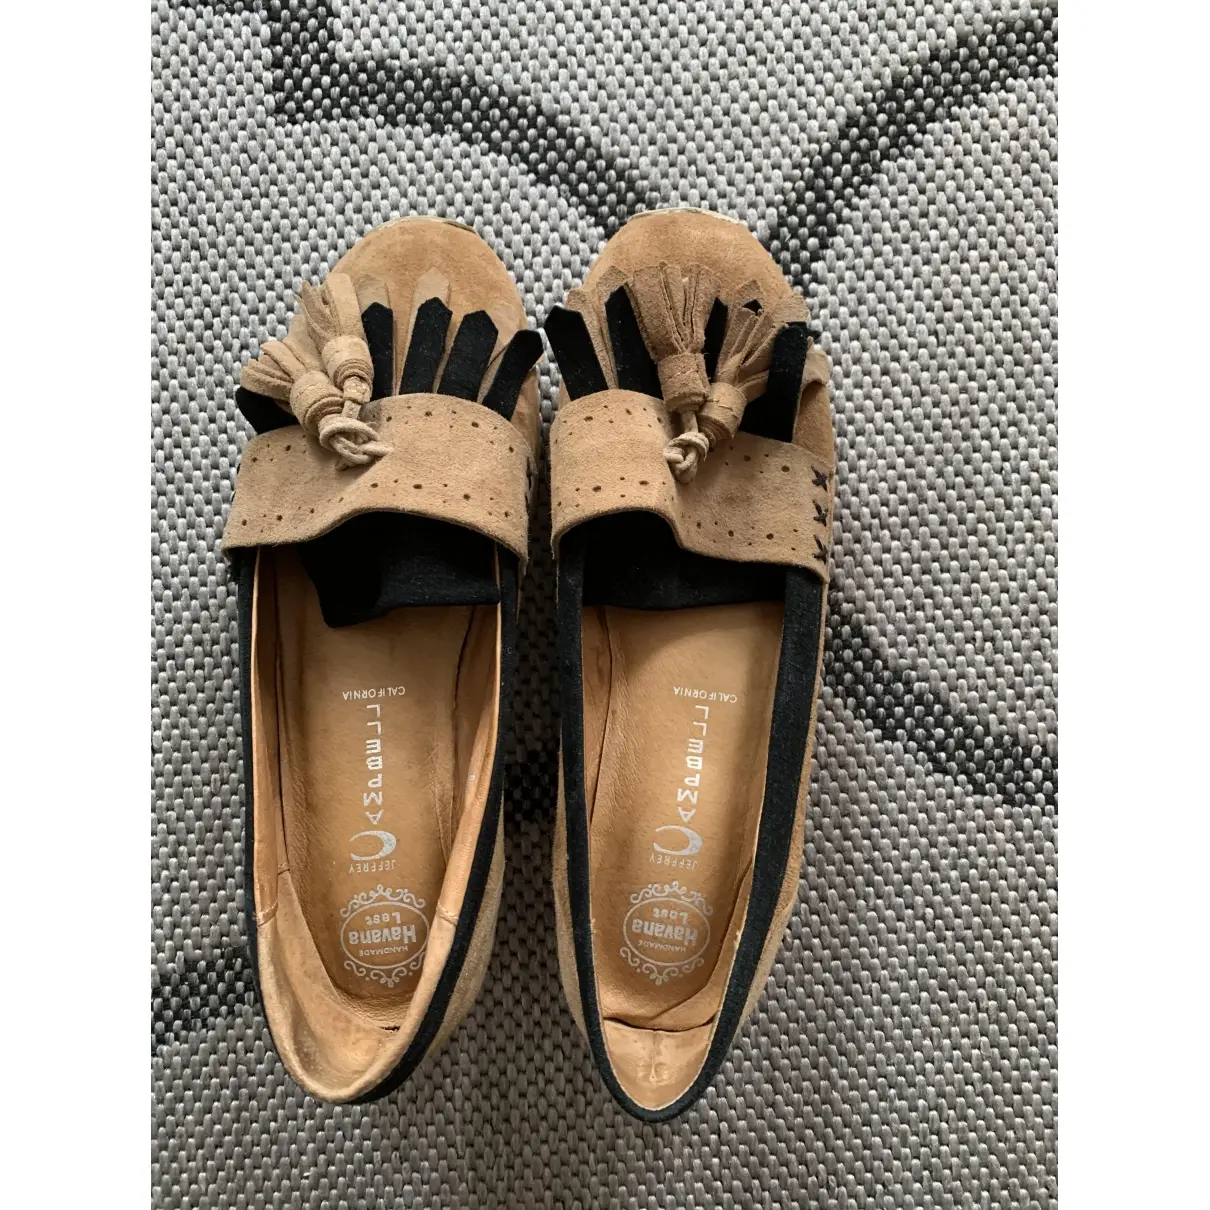 Jeffrey Campbell Leather flats for sale